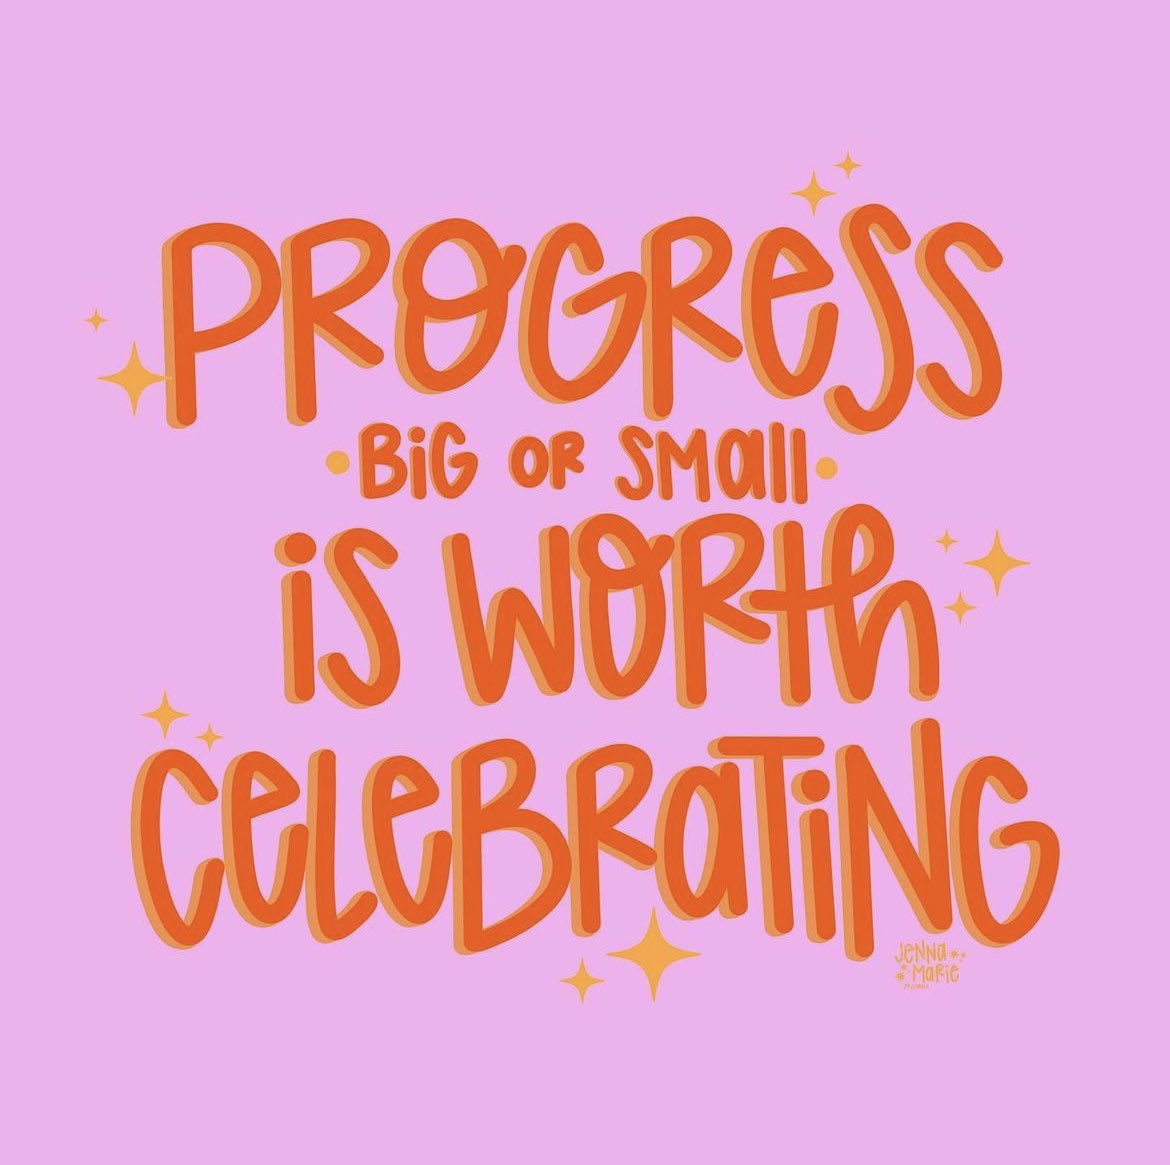 Sometimes, when we attempt a task or experience change, we expect instant/significant results. Incremental progress can create more stable, sustainable change. For those of us who are educators, we can help students to appreciate and CELEBRATE progress…big or small!